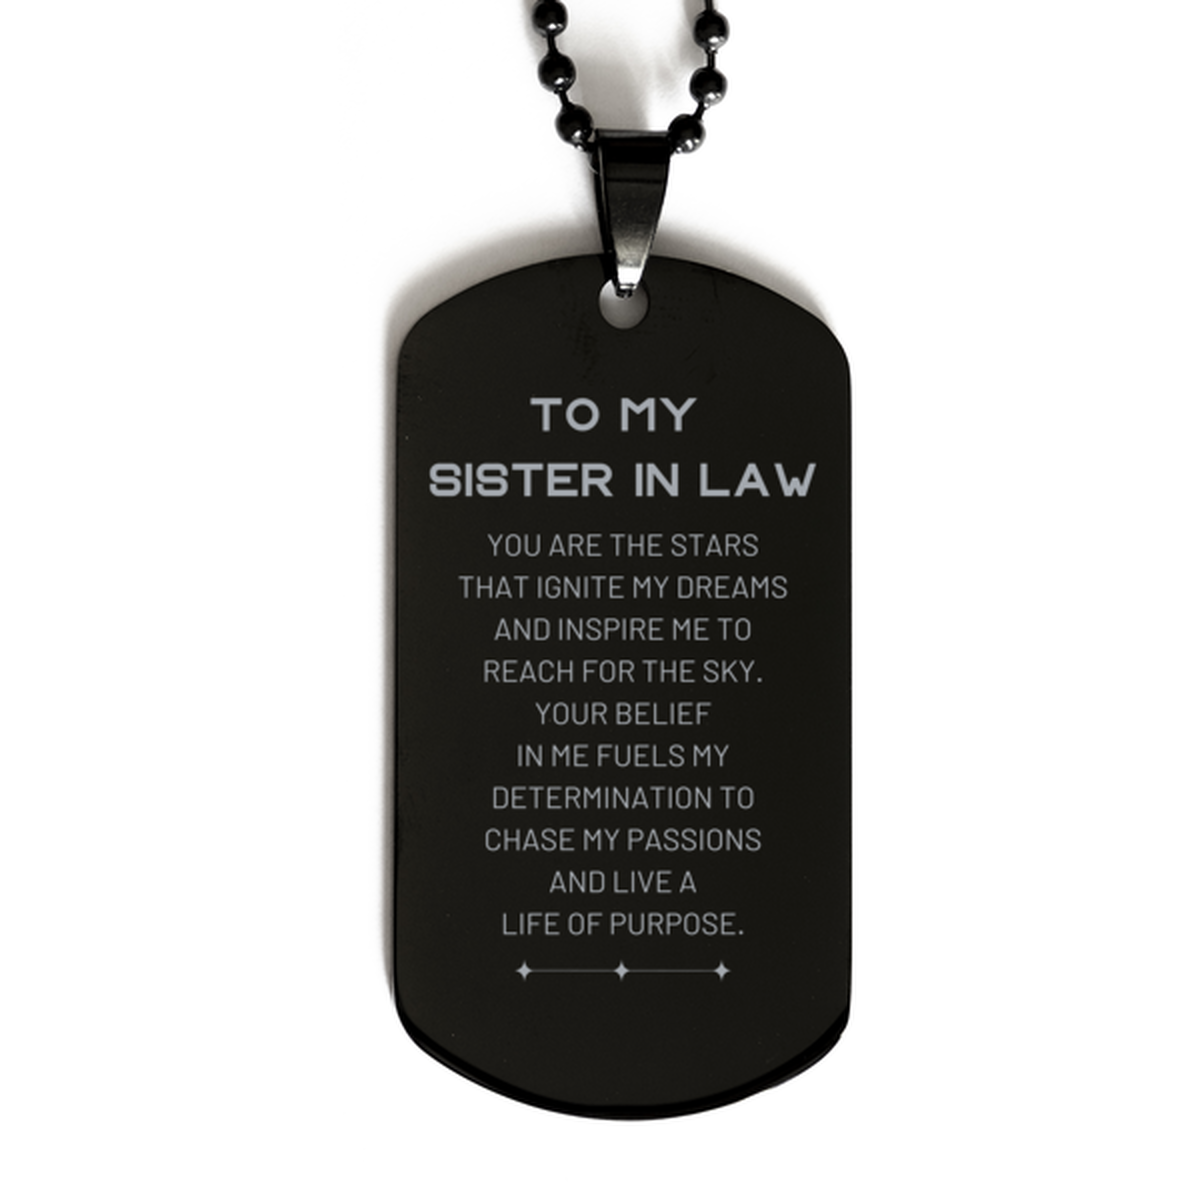 To My Sister In Law Black Dog Tag, You are the stars that ignite my dreams and inspire me to reach for the sky, Birthday Unique Gifts For Sister In Law, Thank You Gifts For Sister In Law